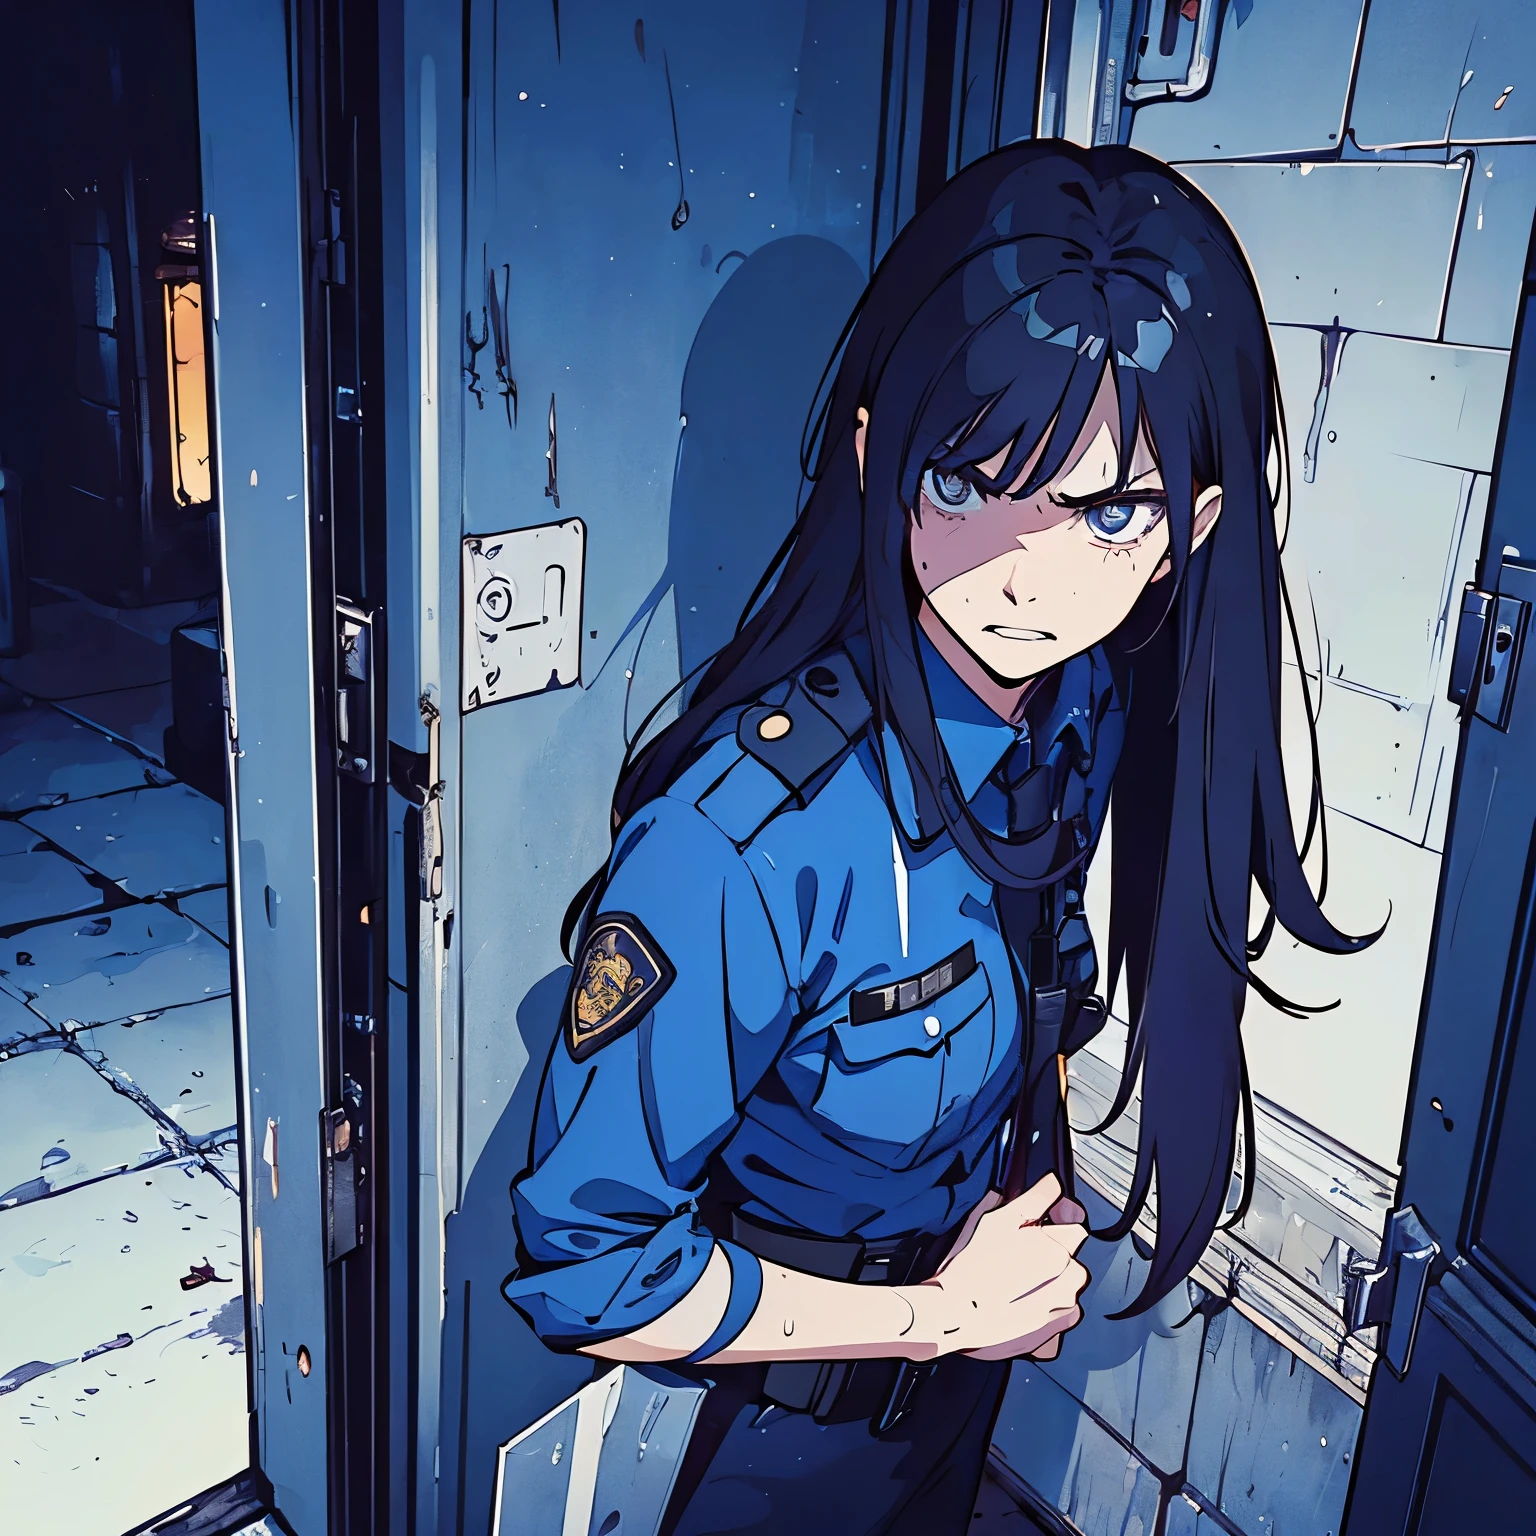 (((masterpiece))) ((( background : horror : backalley : night : alone ))) ((( character : 1 female : : fit body : long smart hair : police officer uniform : getting cornered : defeated : looking at viewer : angry : scared : sweating )))